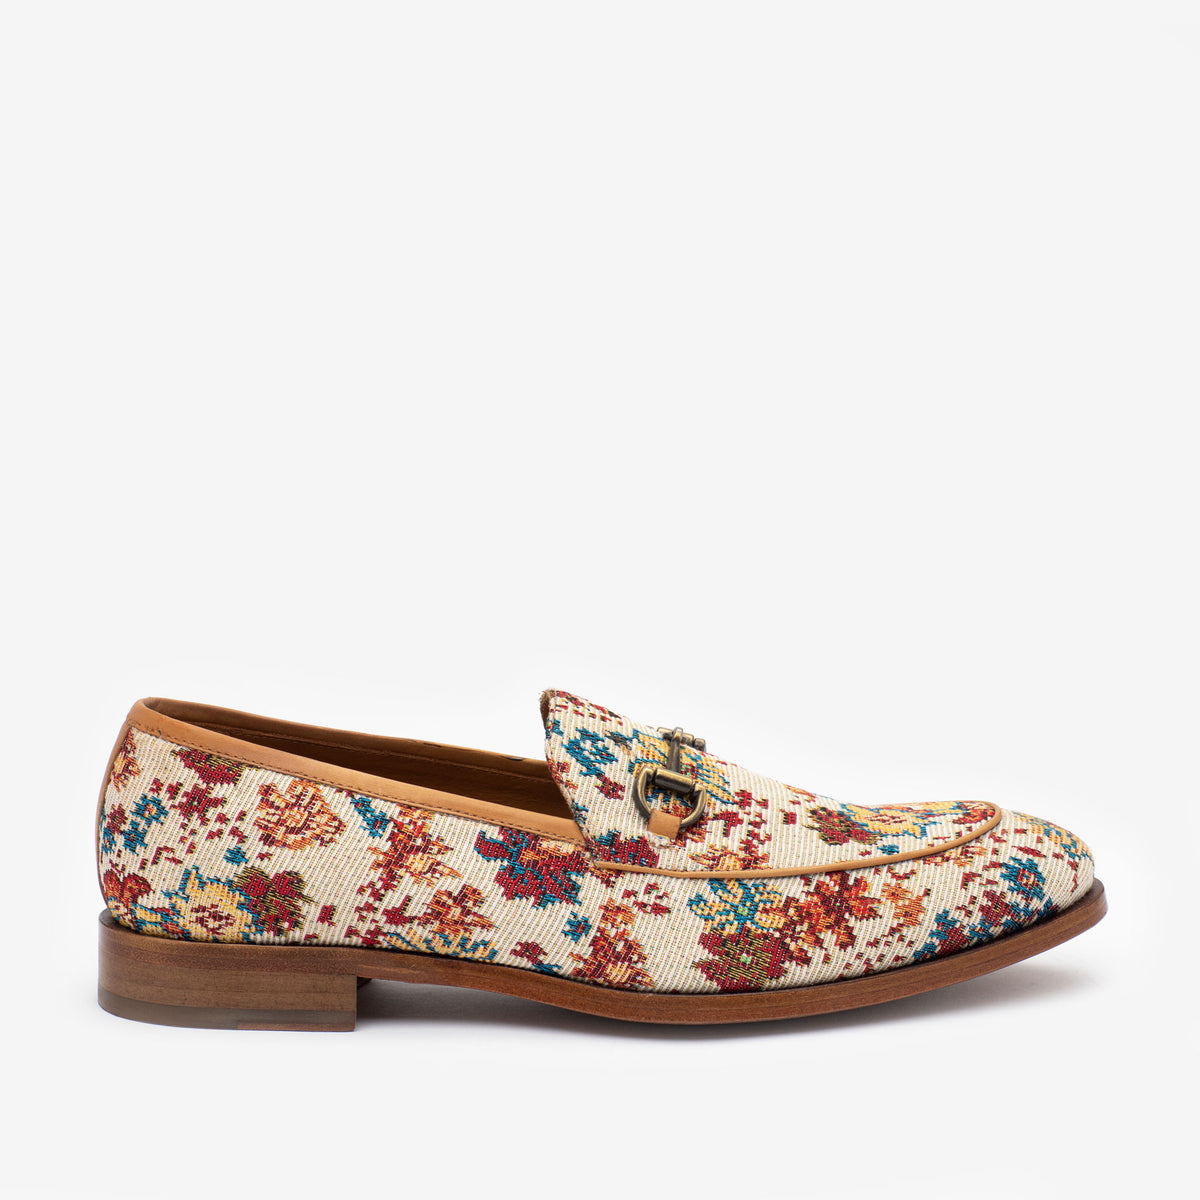 The Russell Loafer in Florence